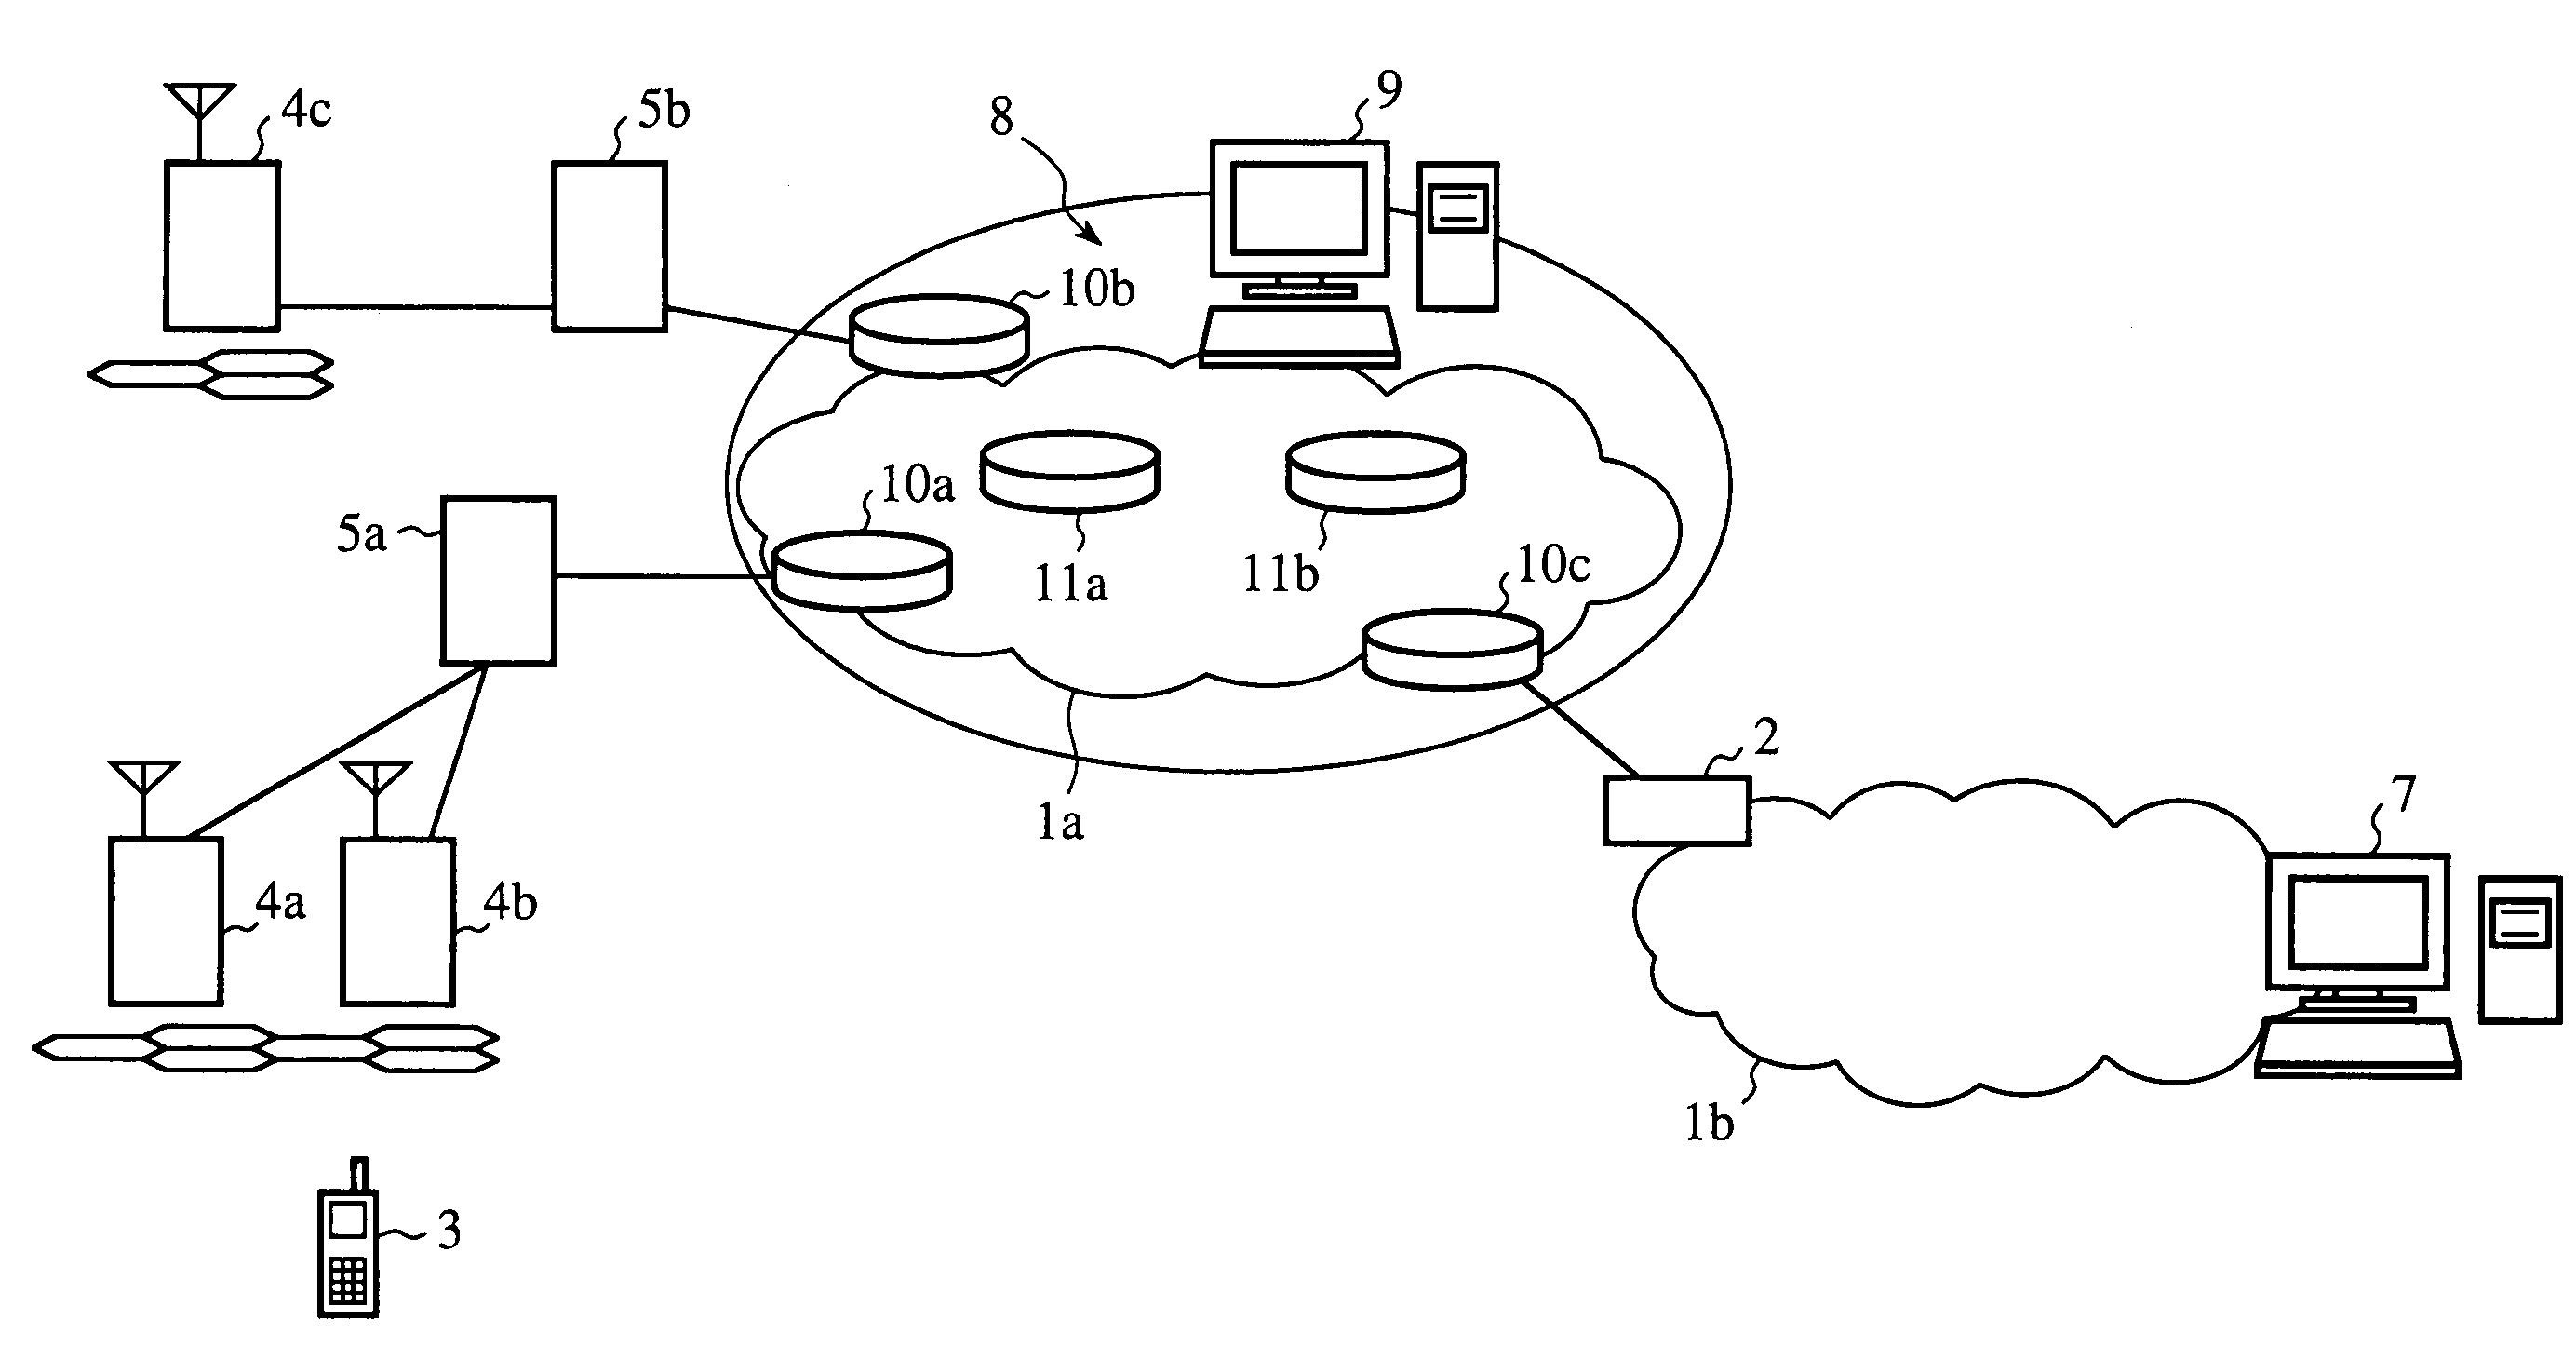 Mobile network that routes a packet without transferring the packet to a home agent server